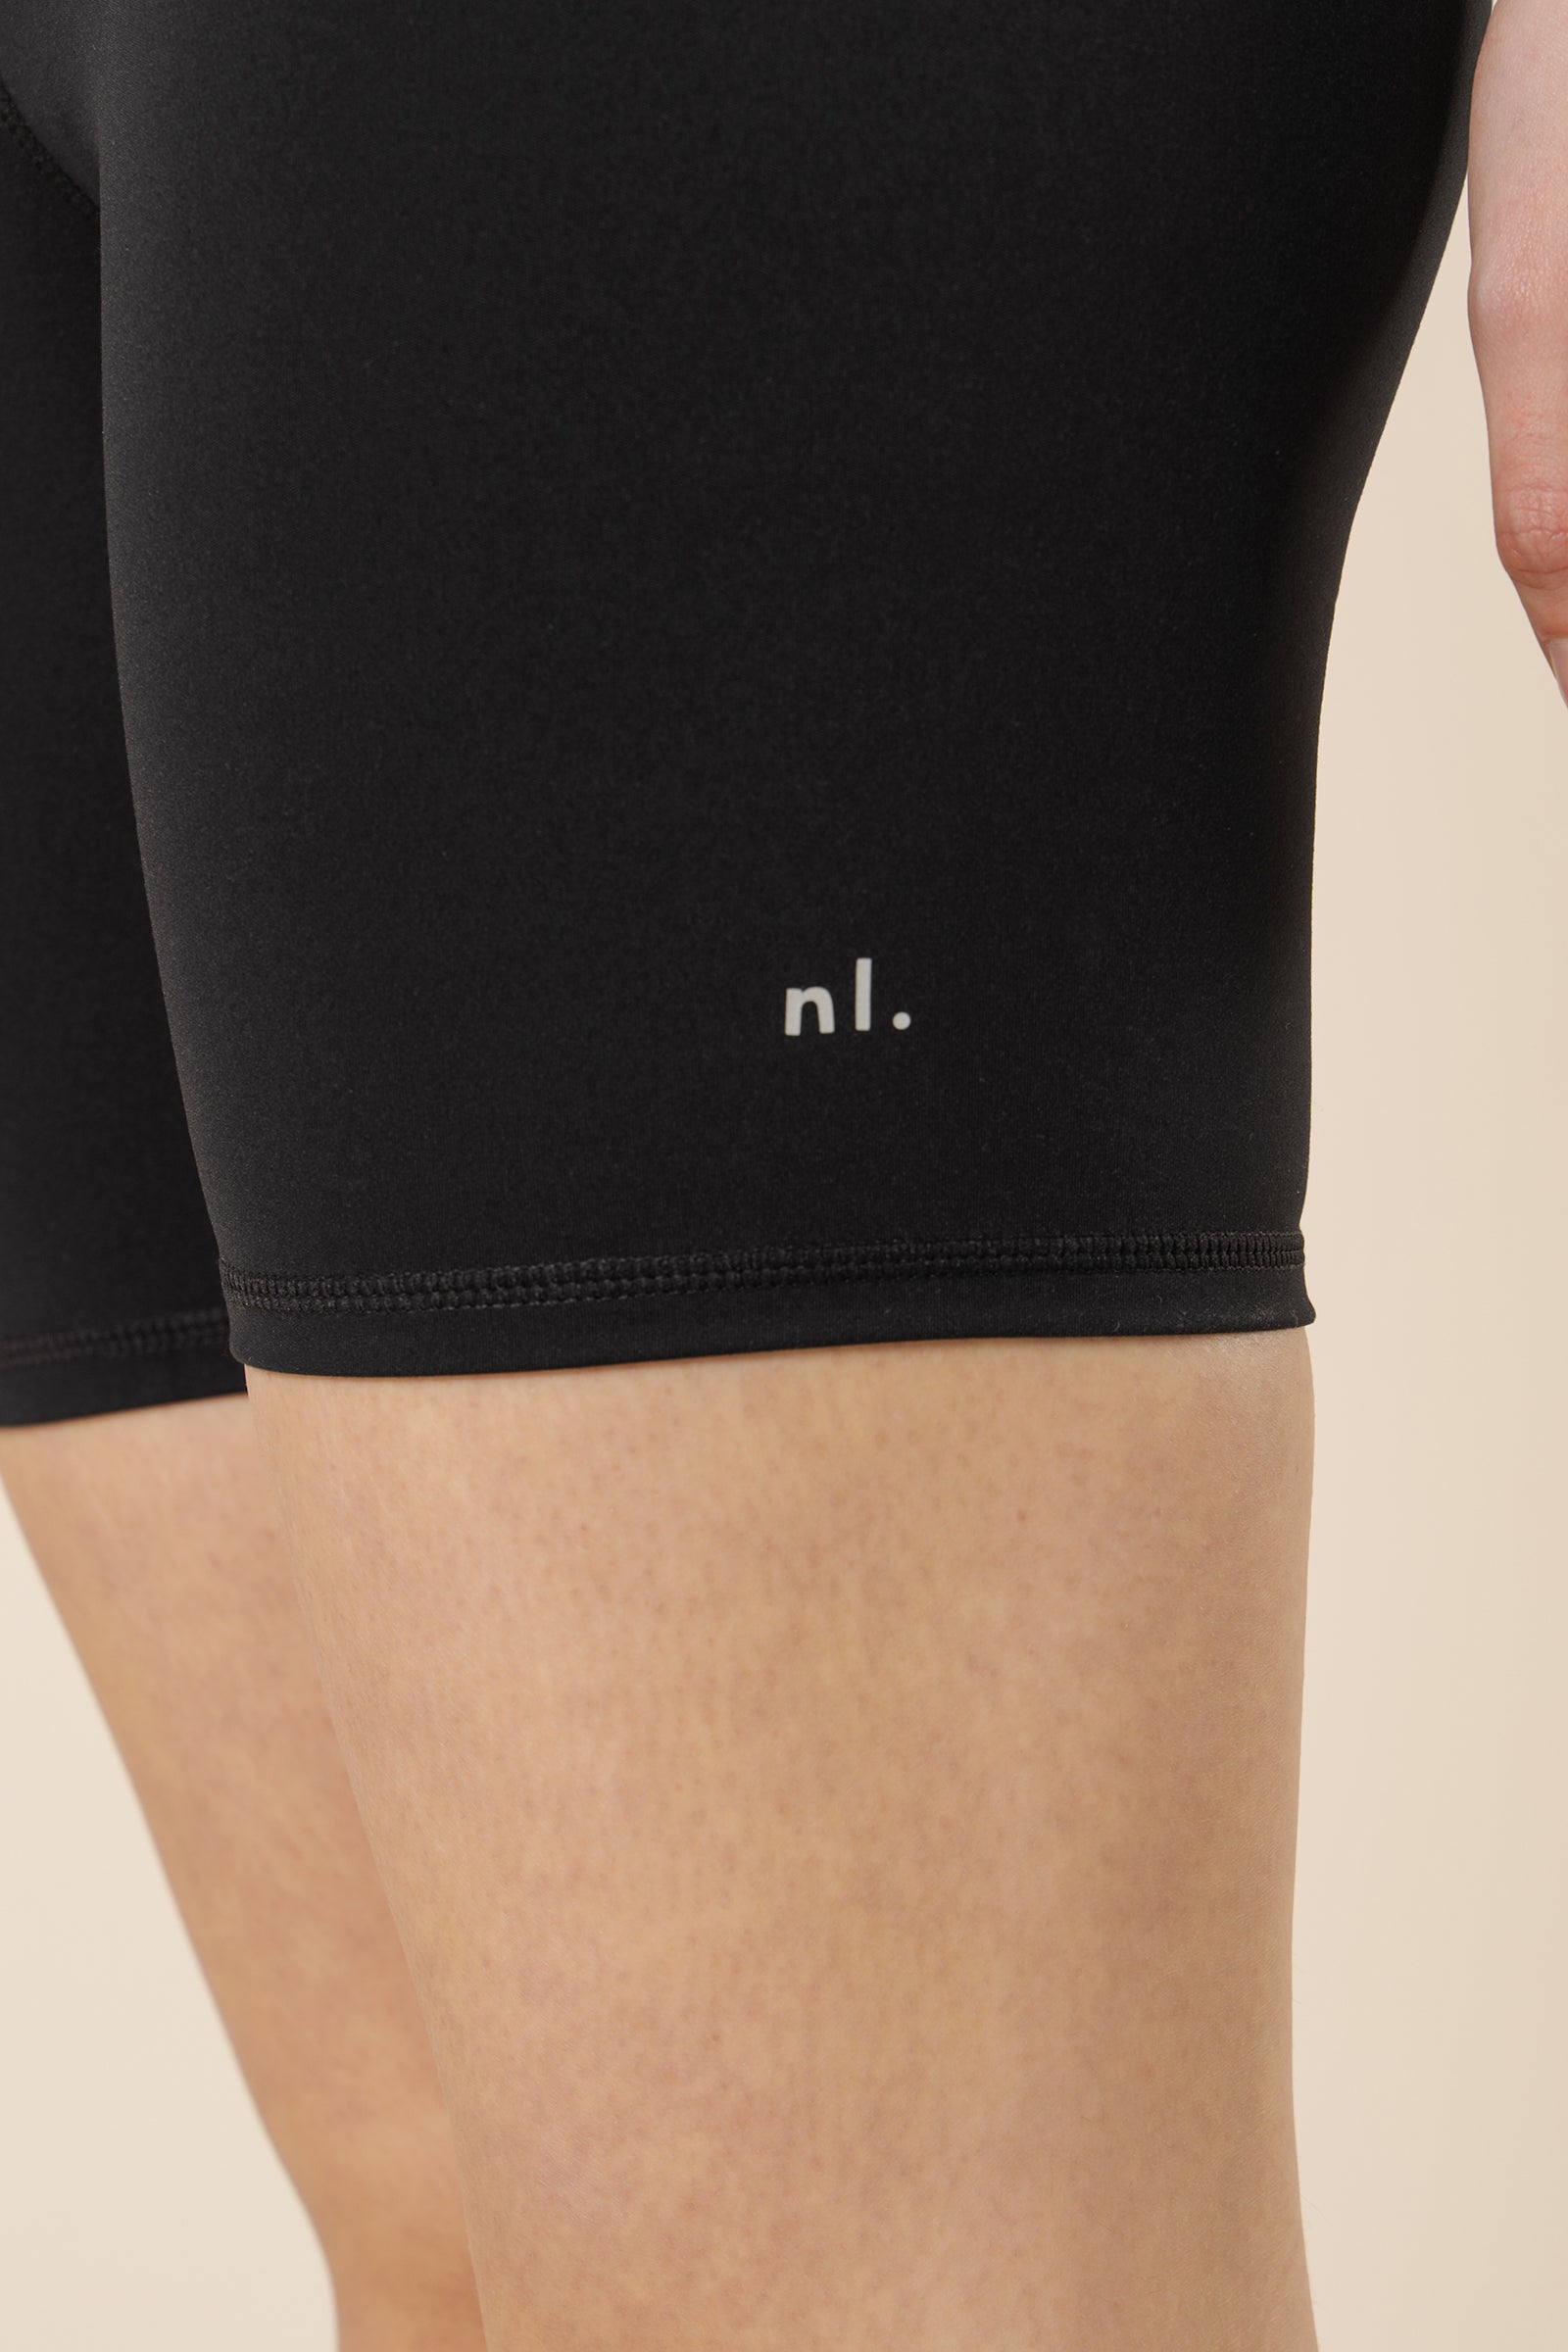 Nude Lucy nude active bike short black shorts